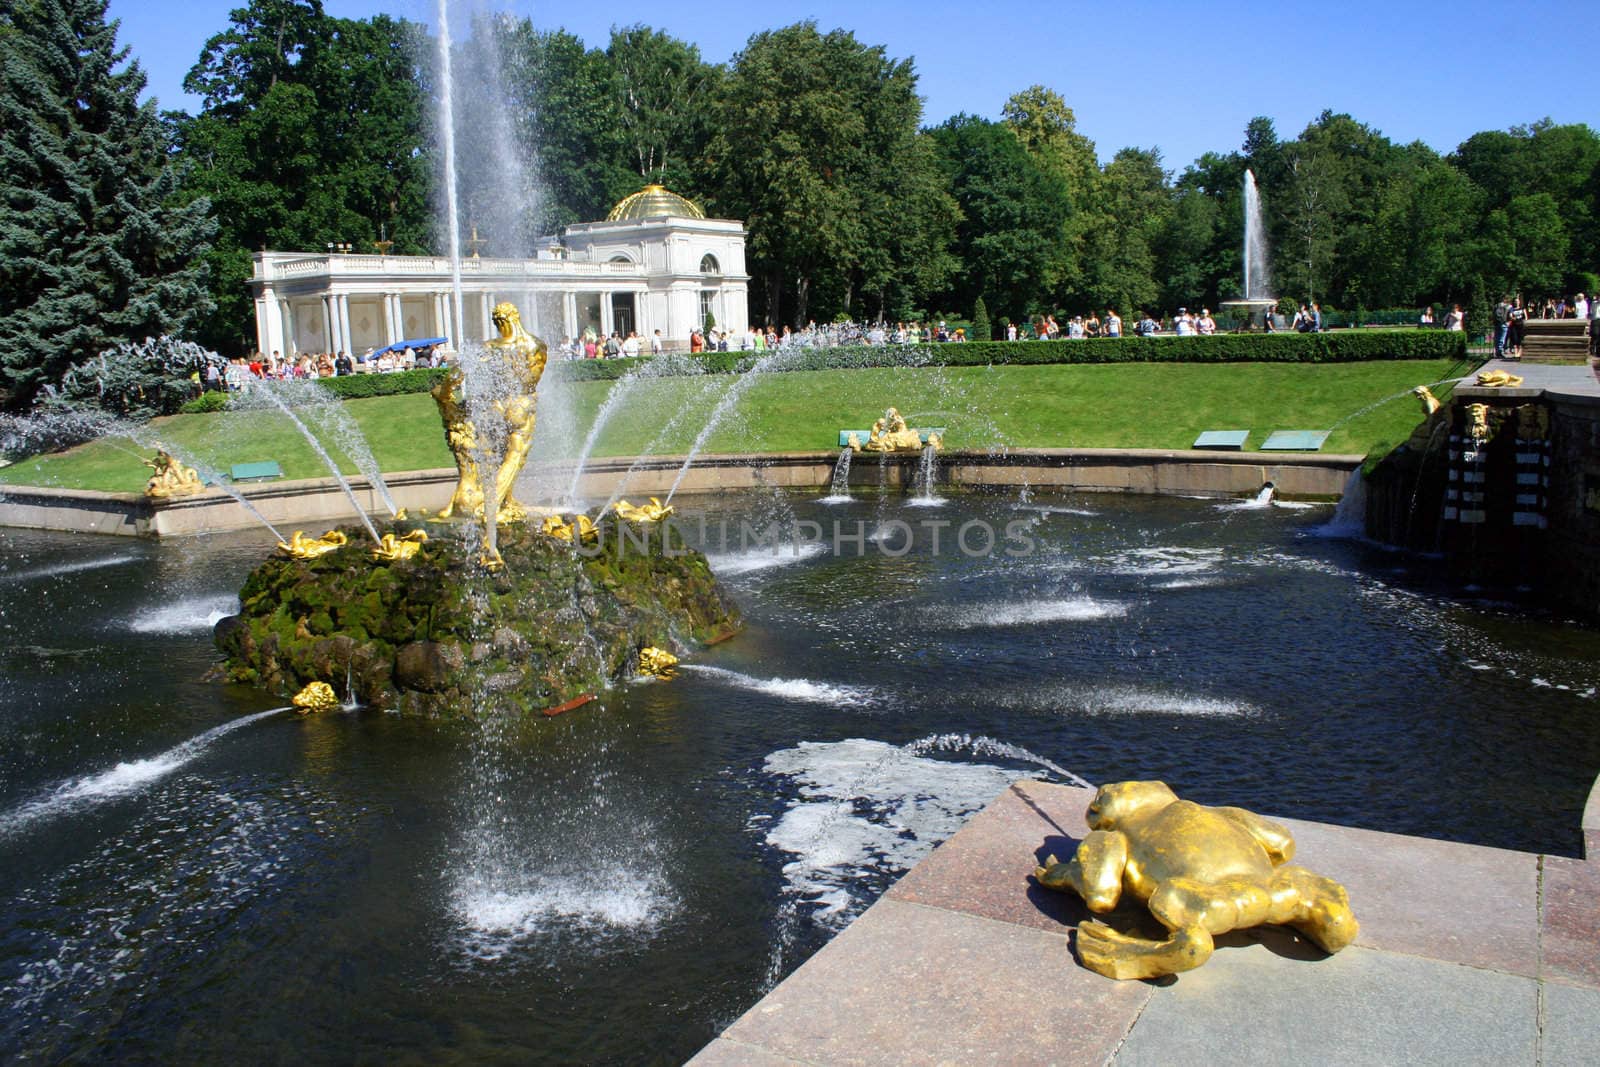 Hundreds of fountains and golden statues surround Peter's Palace- Rusias answer to Versailles.
Built between 1709 and 1724 by over 5000 soldiers and slaves was distreyed in WW11 and in the 50's 
rebuilt from photographs and maps 
My other pictures of Saint Petersburg.